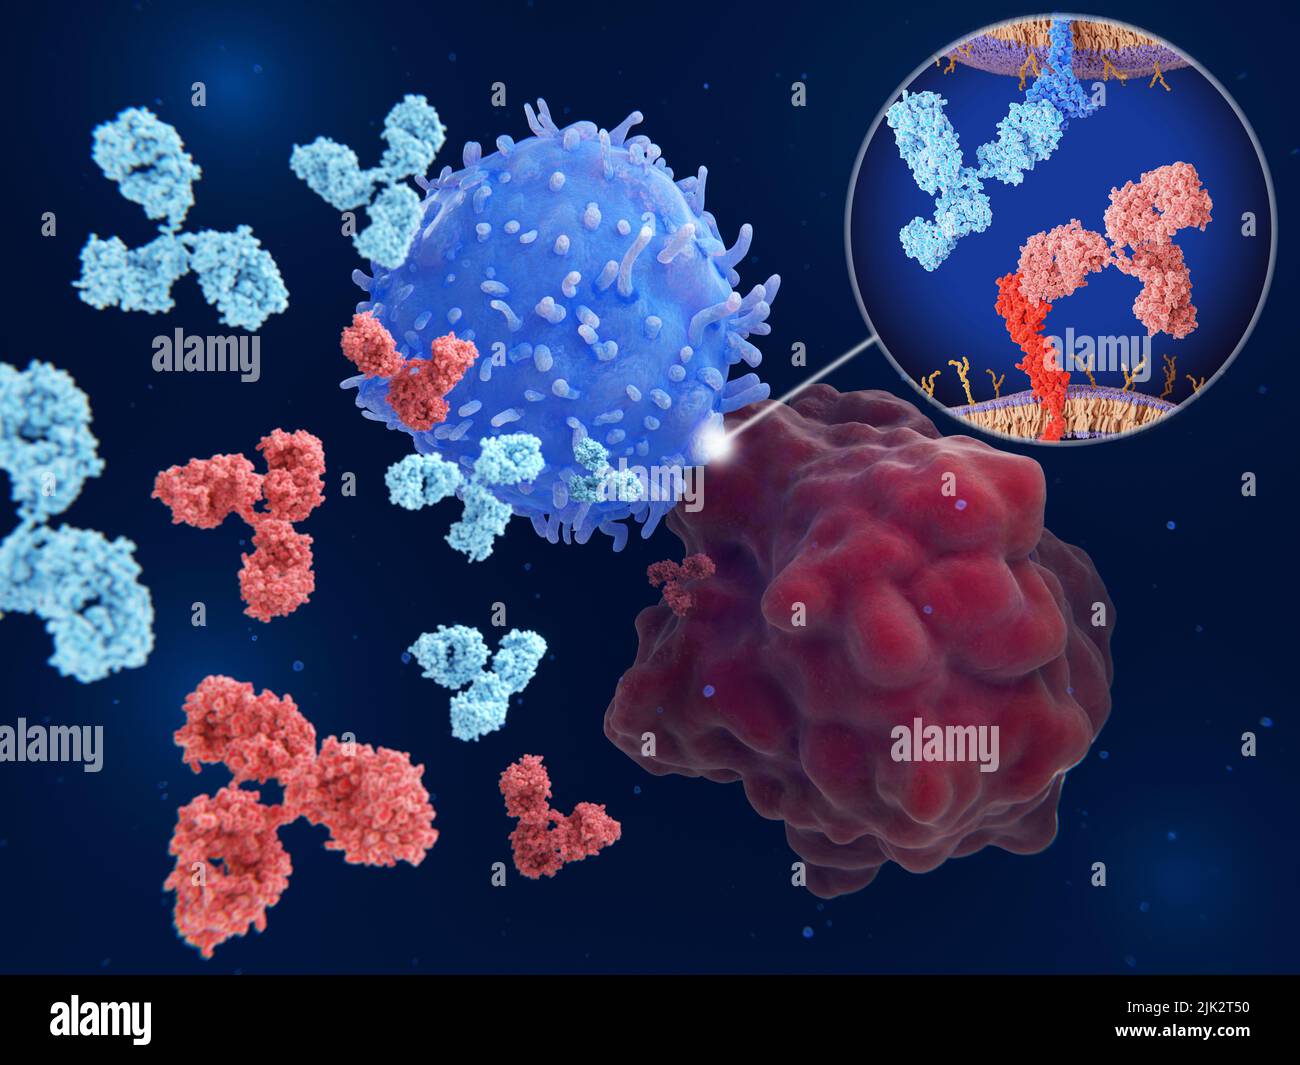 Immune checkpoint inhibitors, illustration. Immune checkpoints are regulators of the immune system. Antibodies (light blue and red) block the interaction between PD-L1 (programmed cell death 1 ligand 1, red molecule) on the surface of a cancer cell (large red) and the immune checkpoint PD-1 (programmed cell death protein 1, blue molecule) on a T-cell (large blue), that would lead to the inhibition of T-cell killing tumour cells. Stock Photo